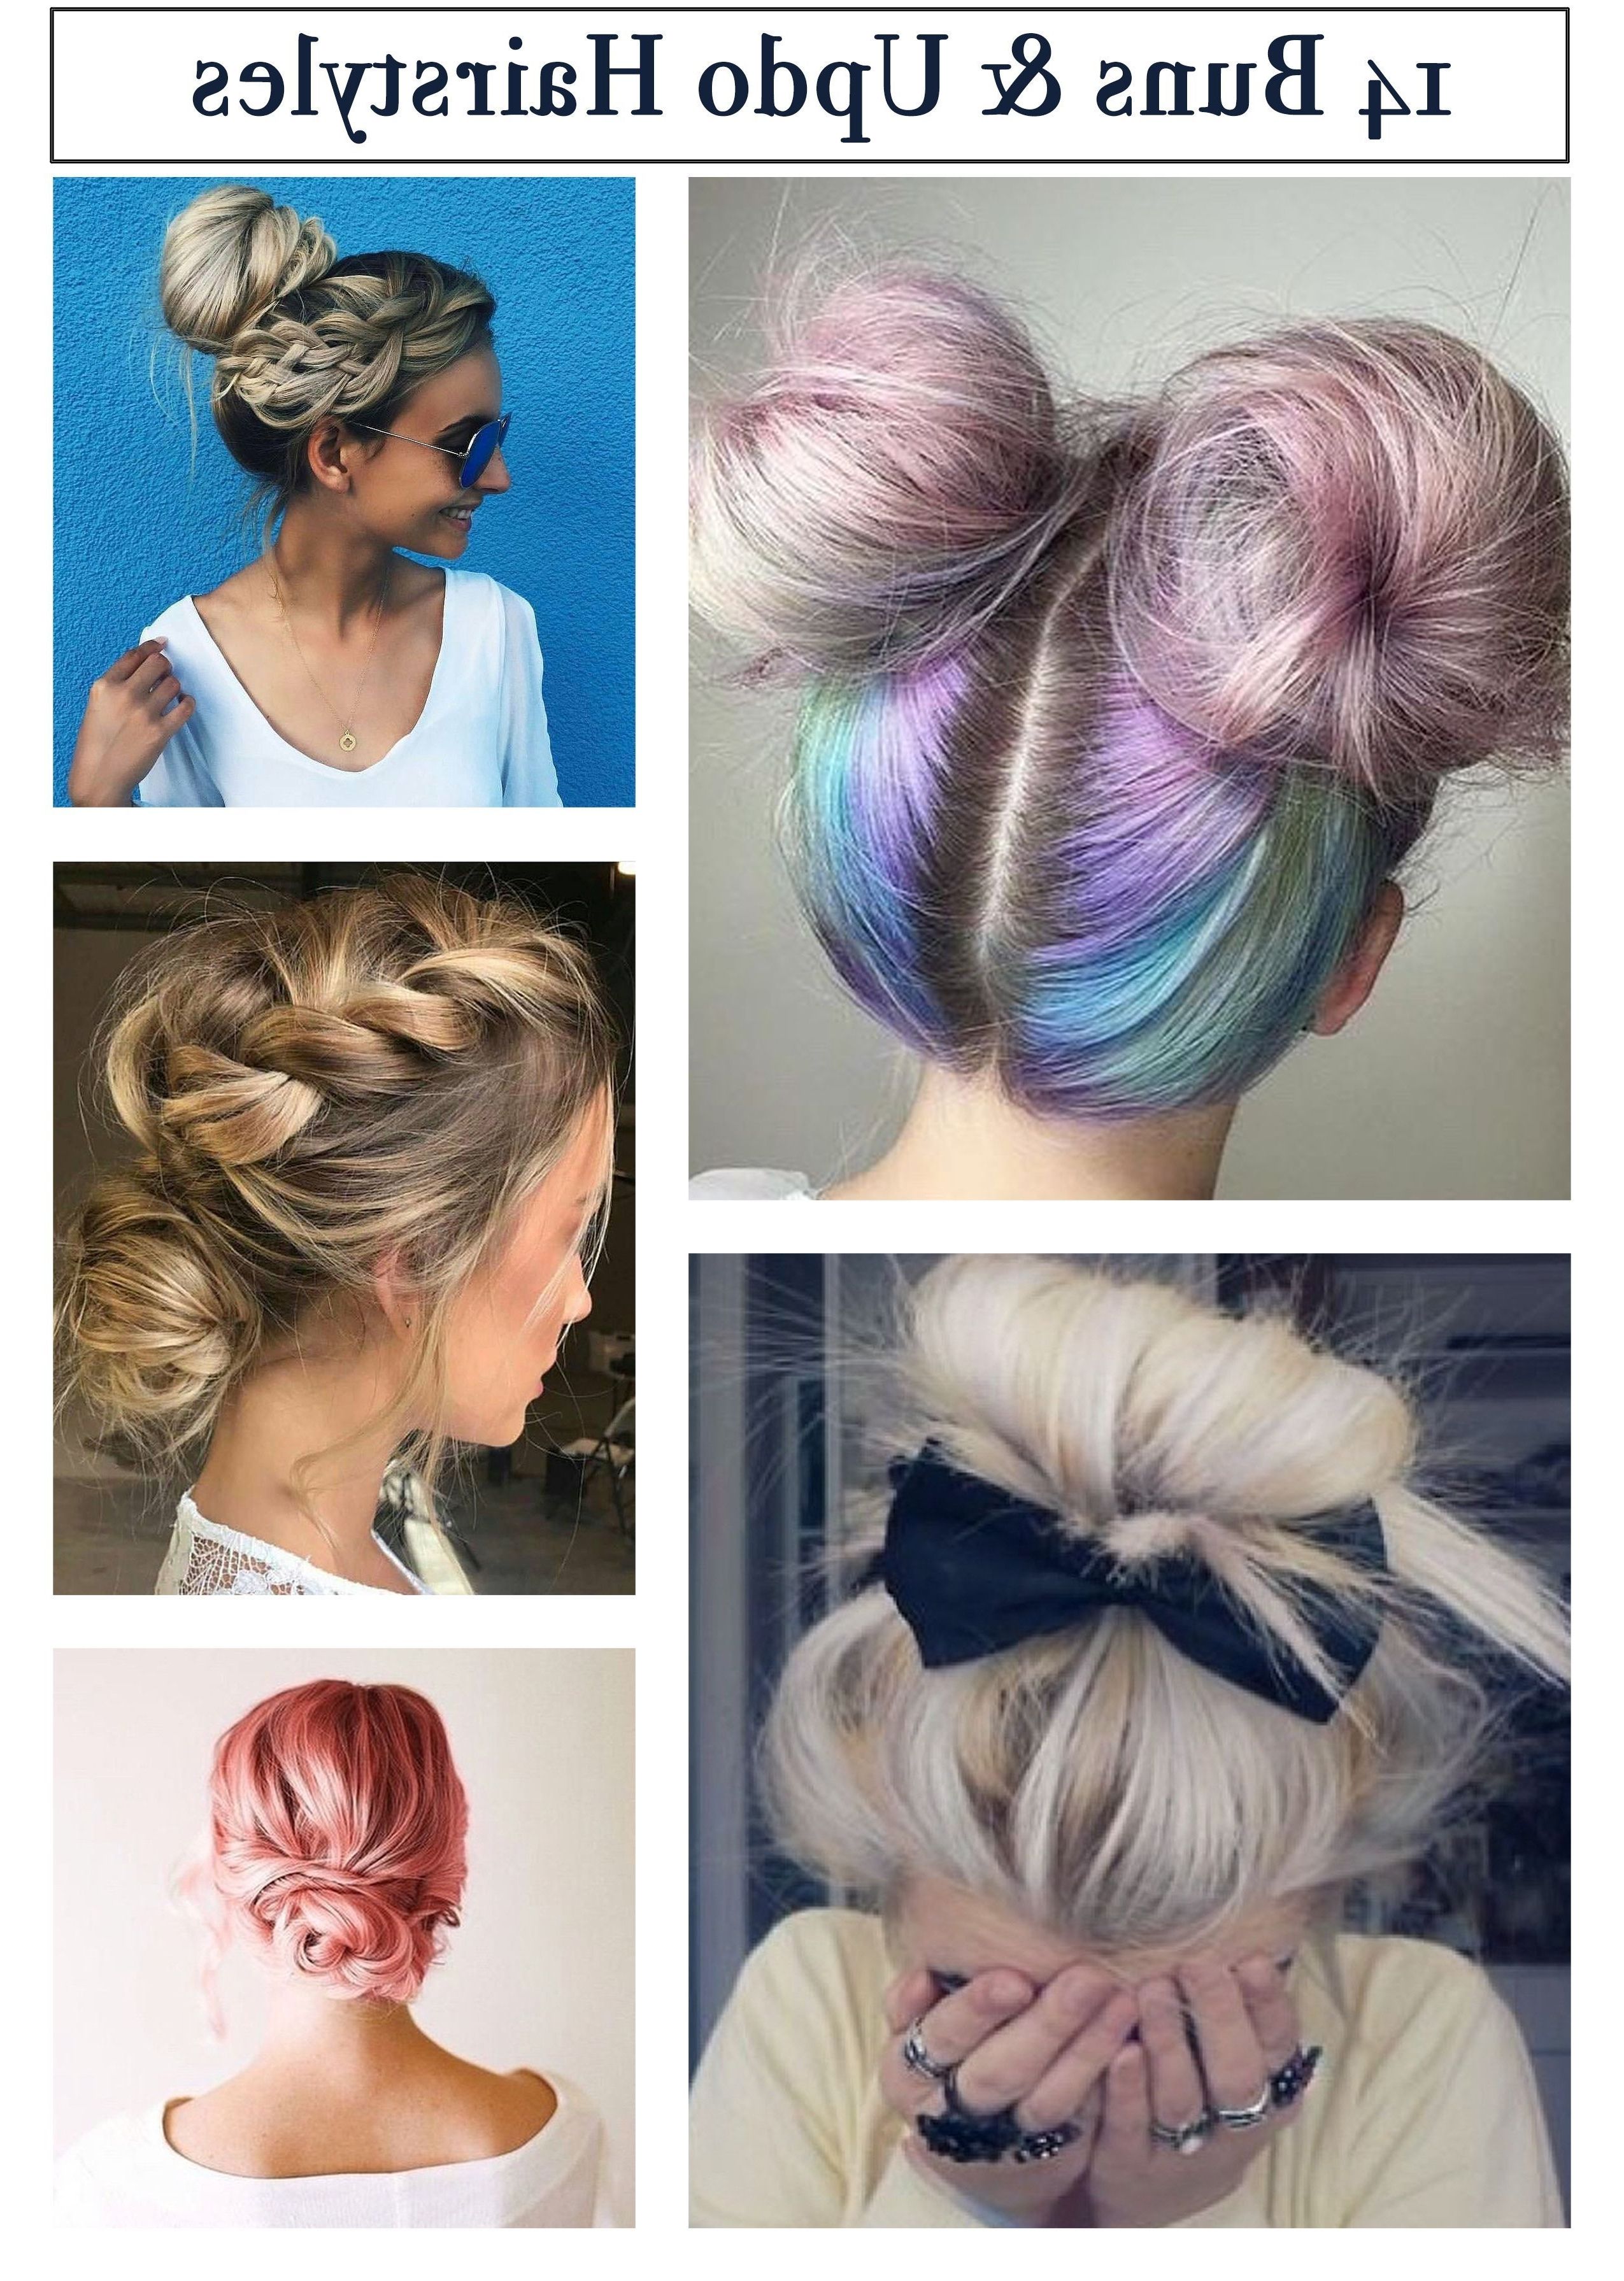 Updo Hairstyles To Try This Summer – 14 Different Hair Buns With Well Known Upside Down Braids With Double Buns (View 11 of 15)